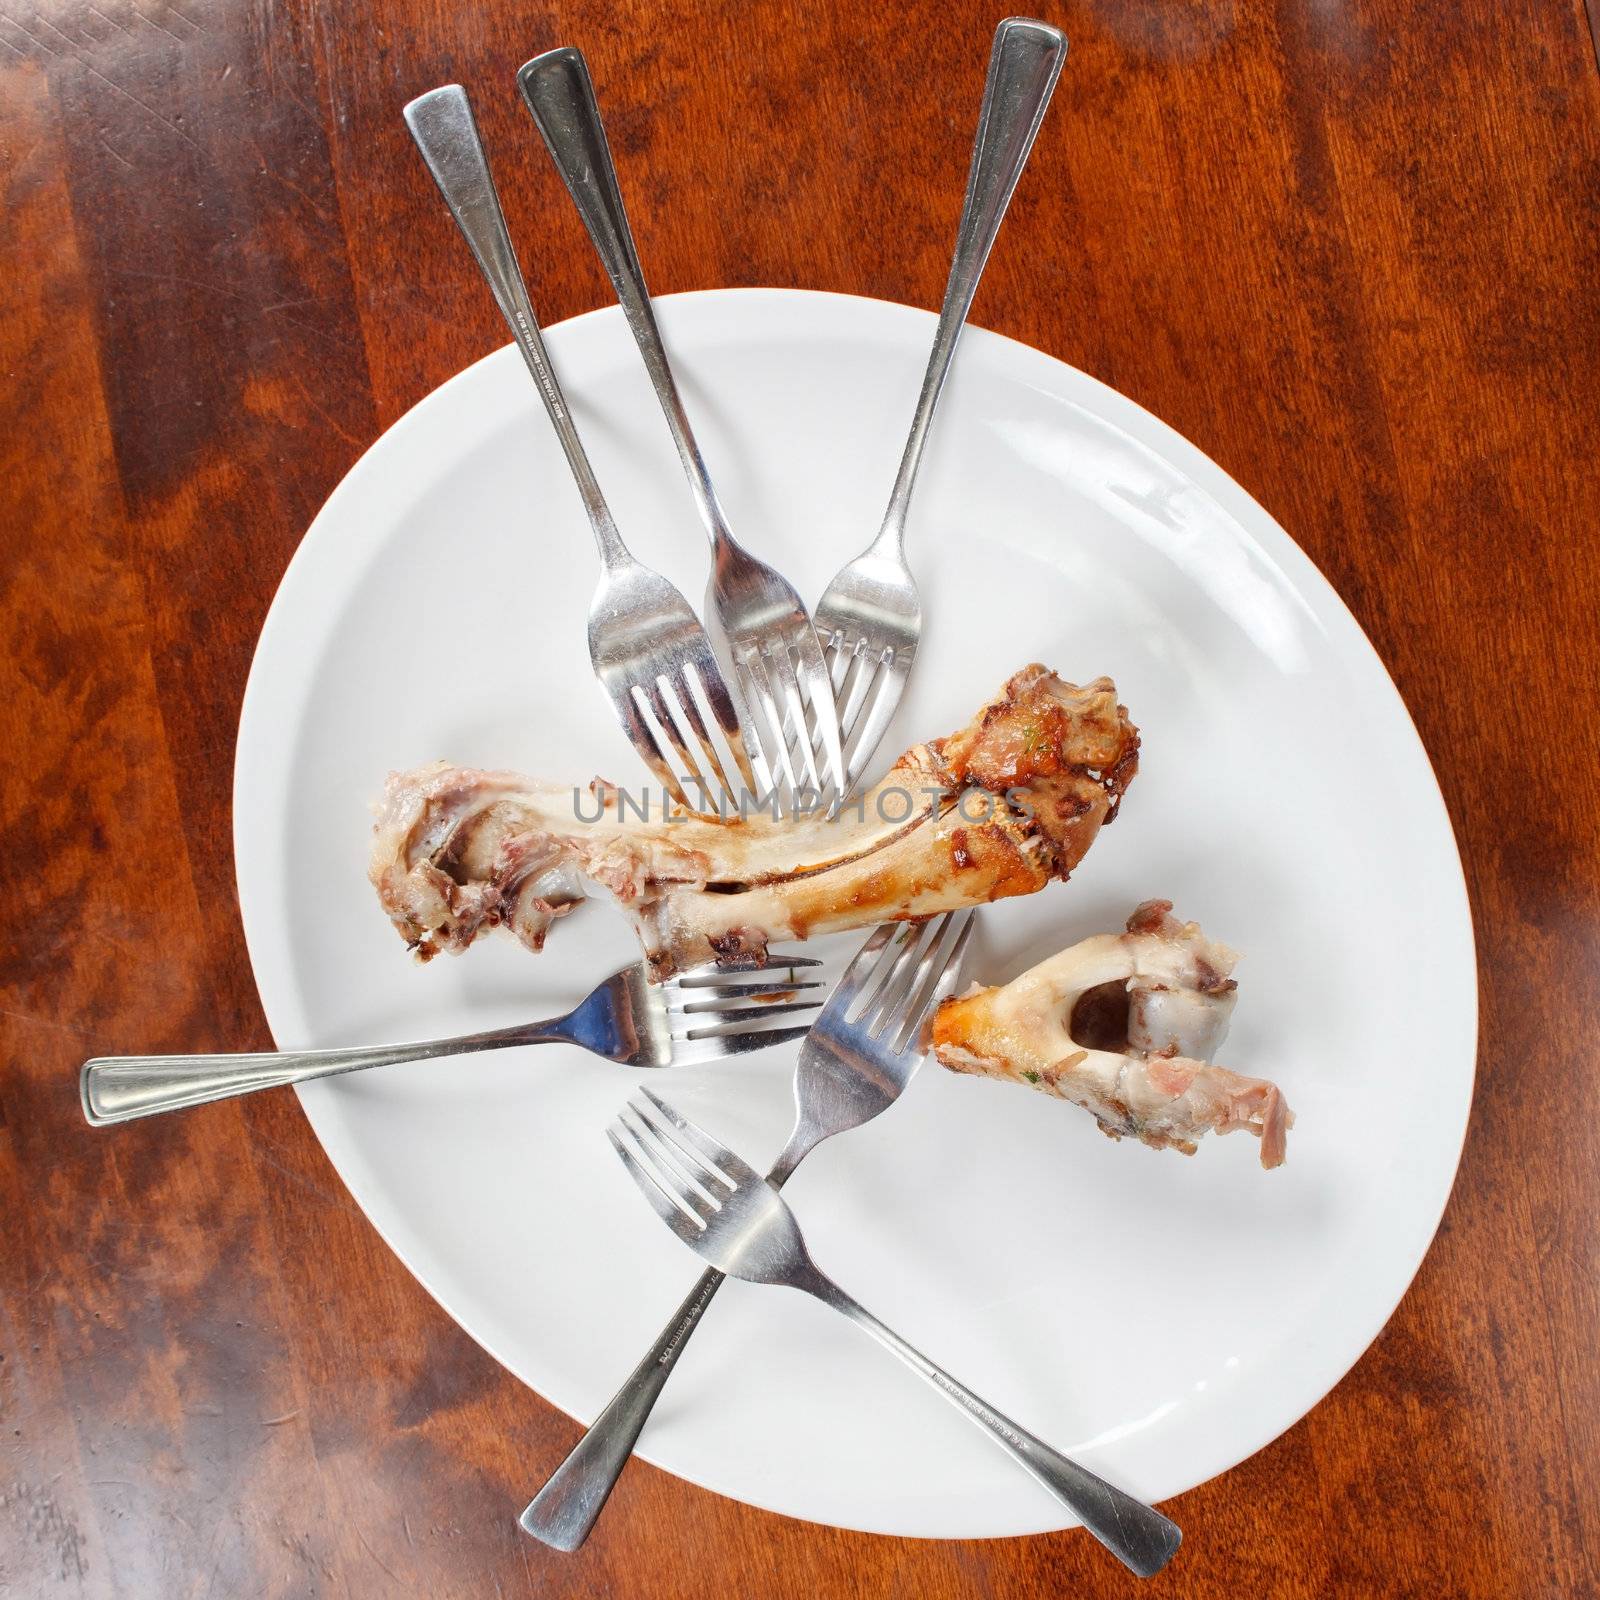 bones and forks on the plate by shebeko